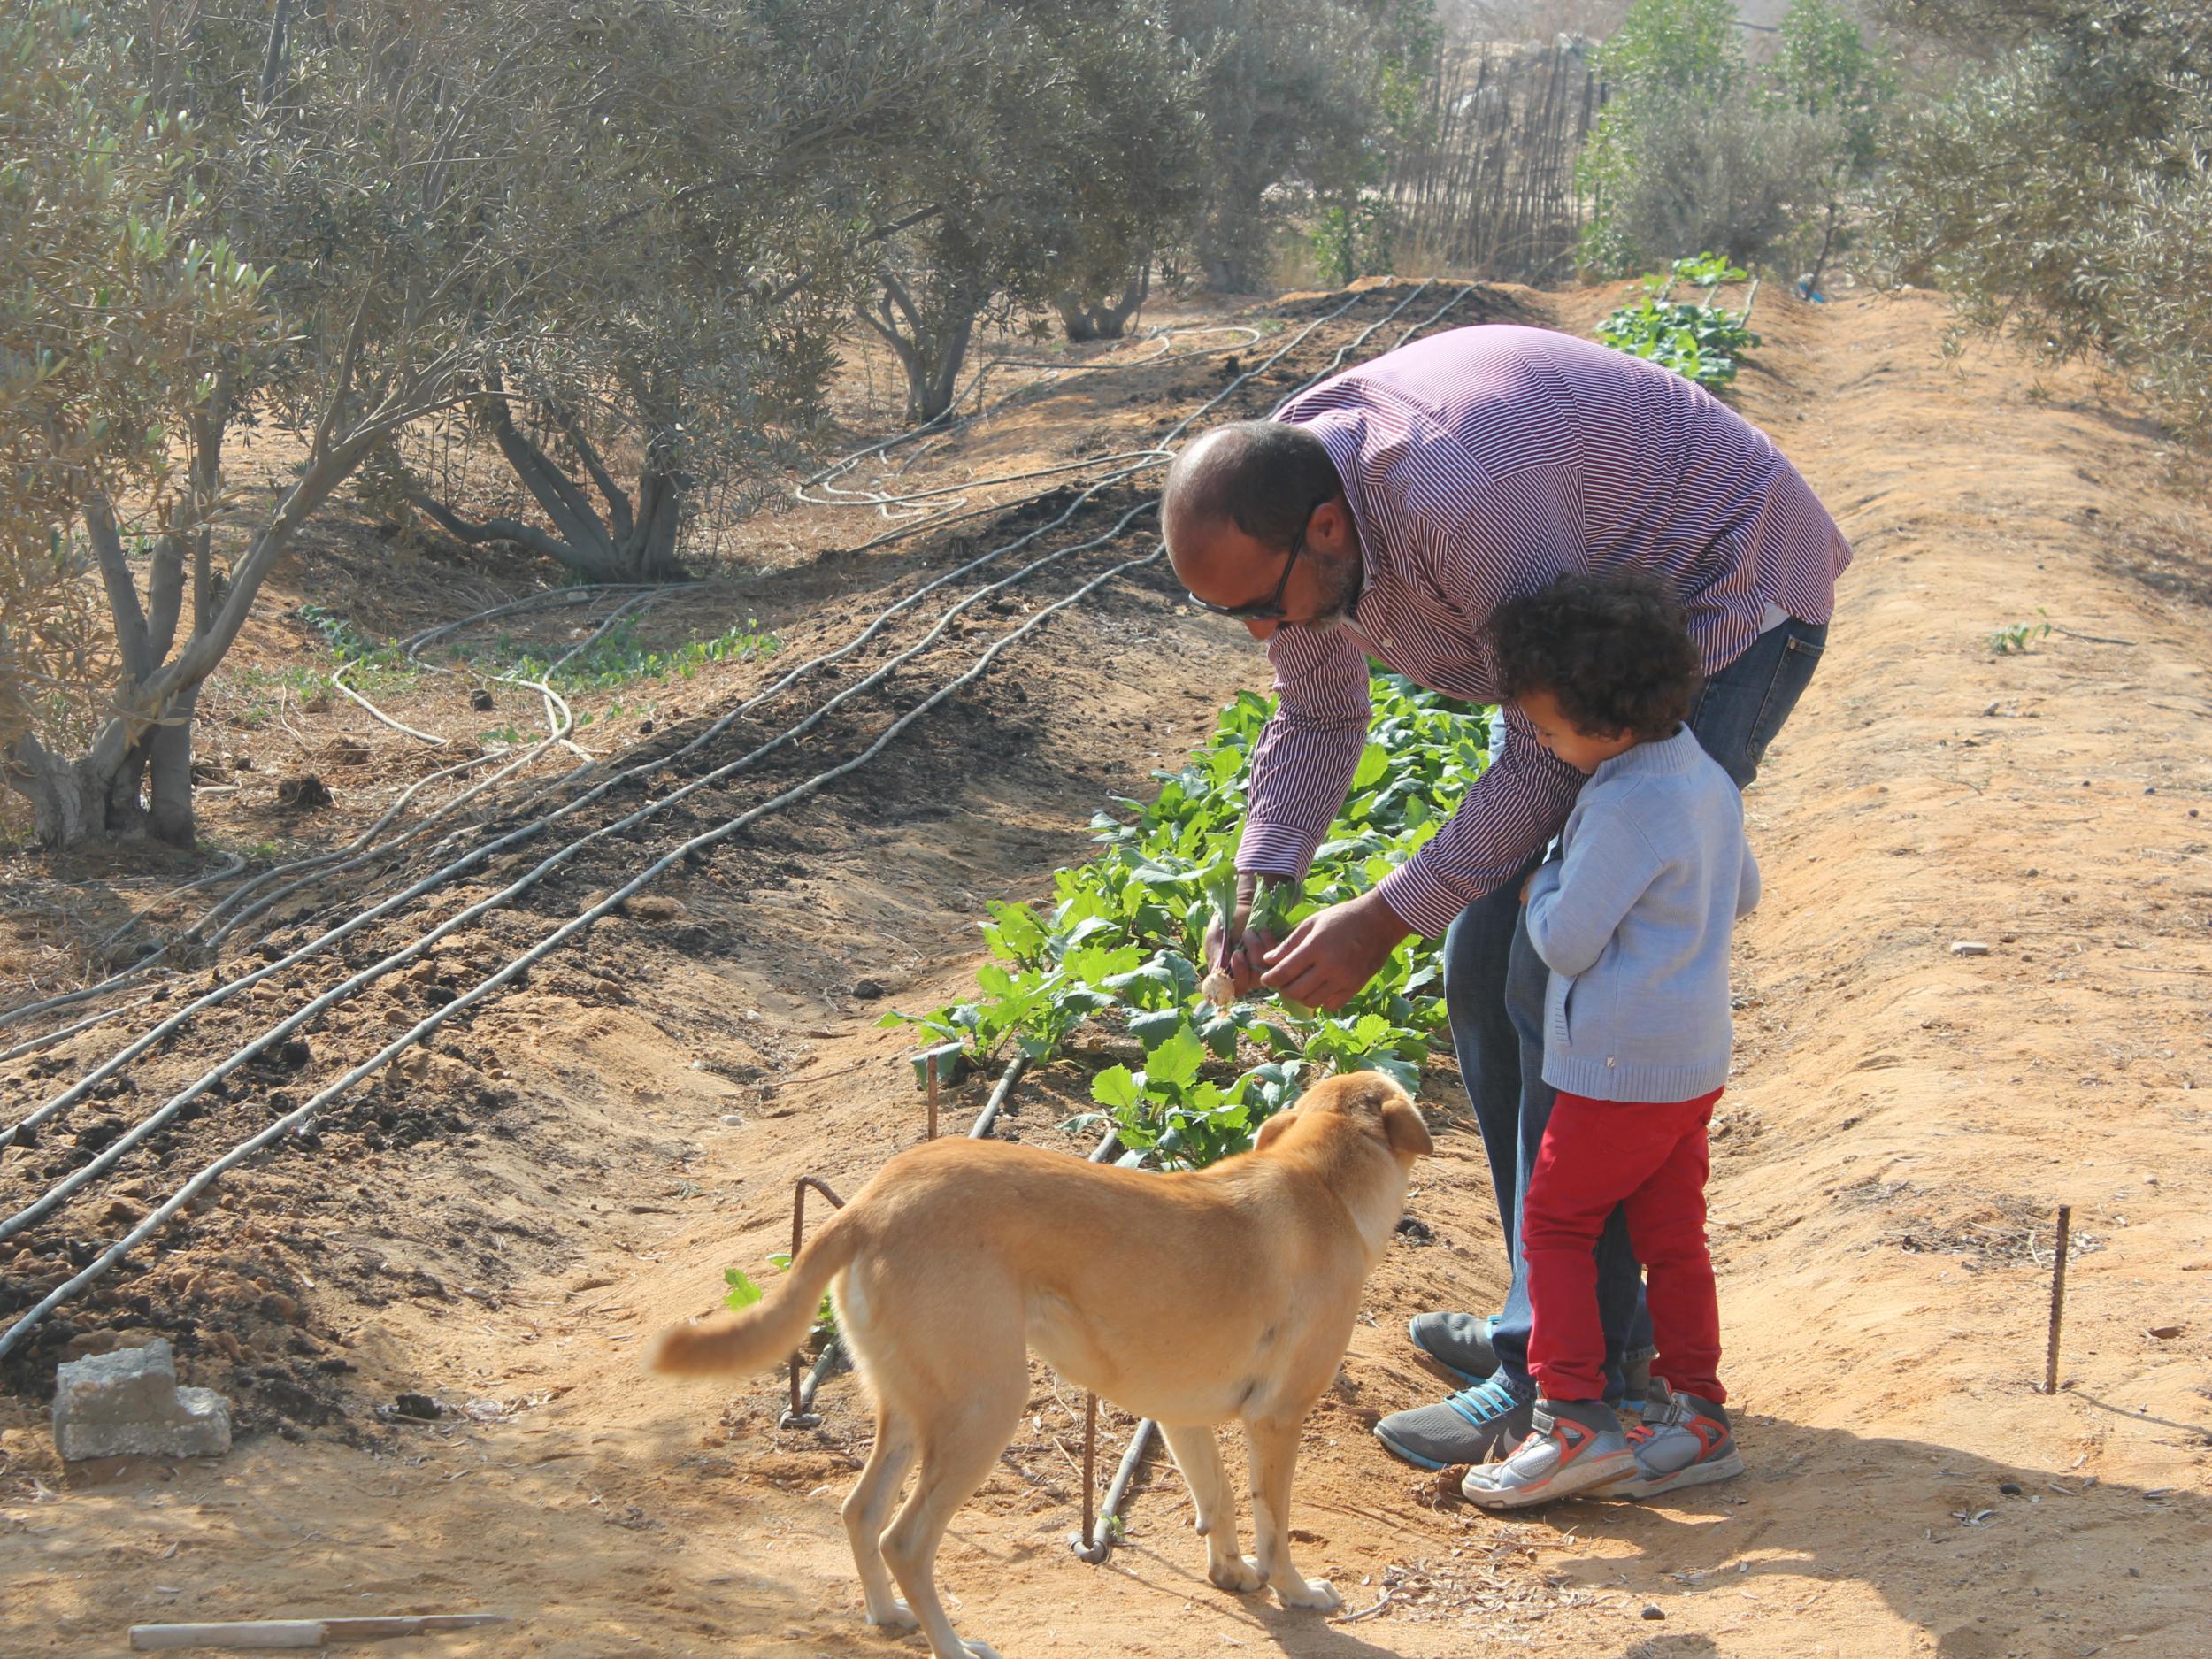 Unlike most Egyptian farms, Farrag only uses minimal added nutrients for his plants (Edmund Bower)